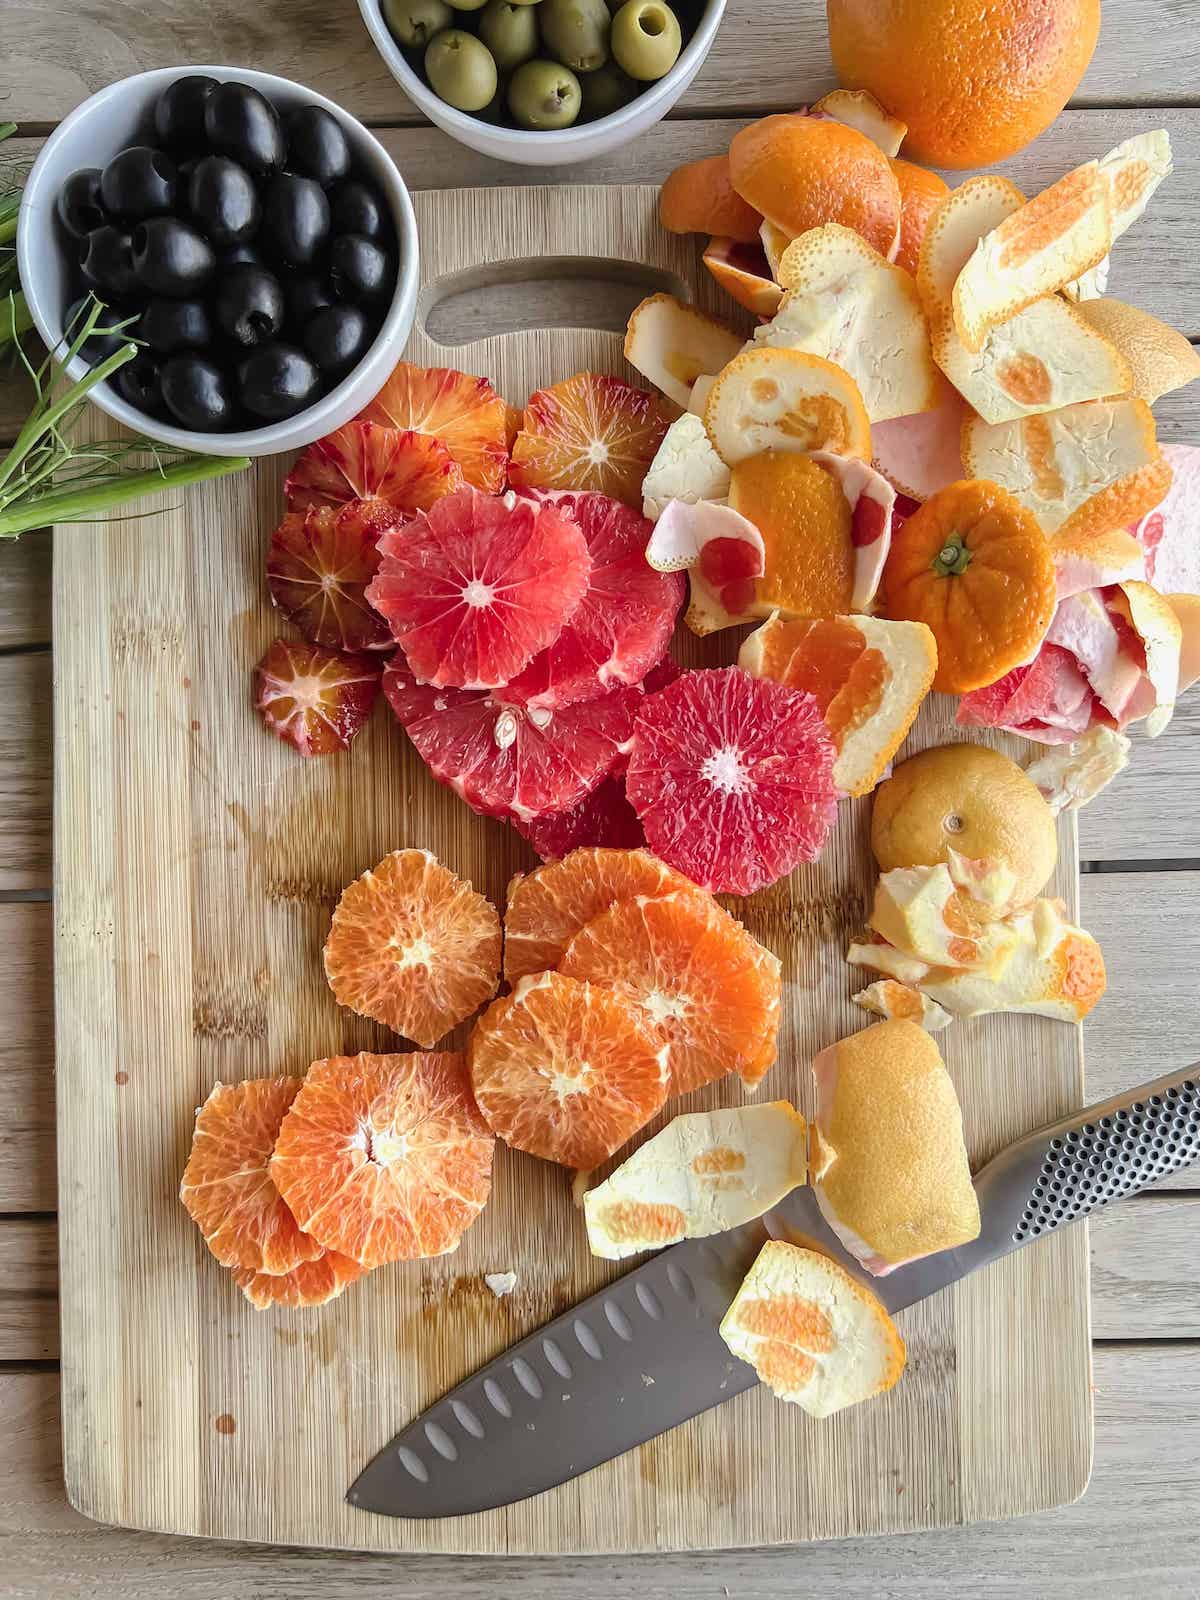 Sliced rounds of mixed citrus fruit on a wood cutting board with a knife.